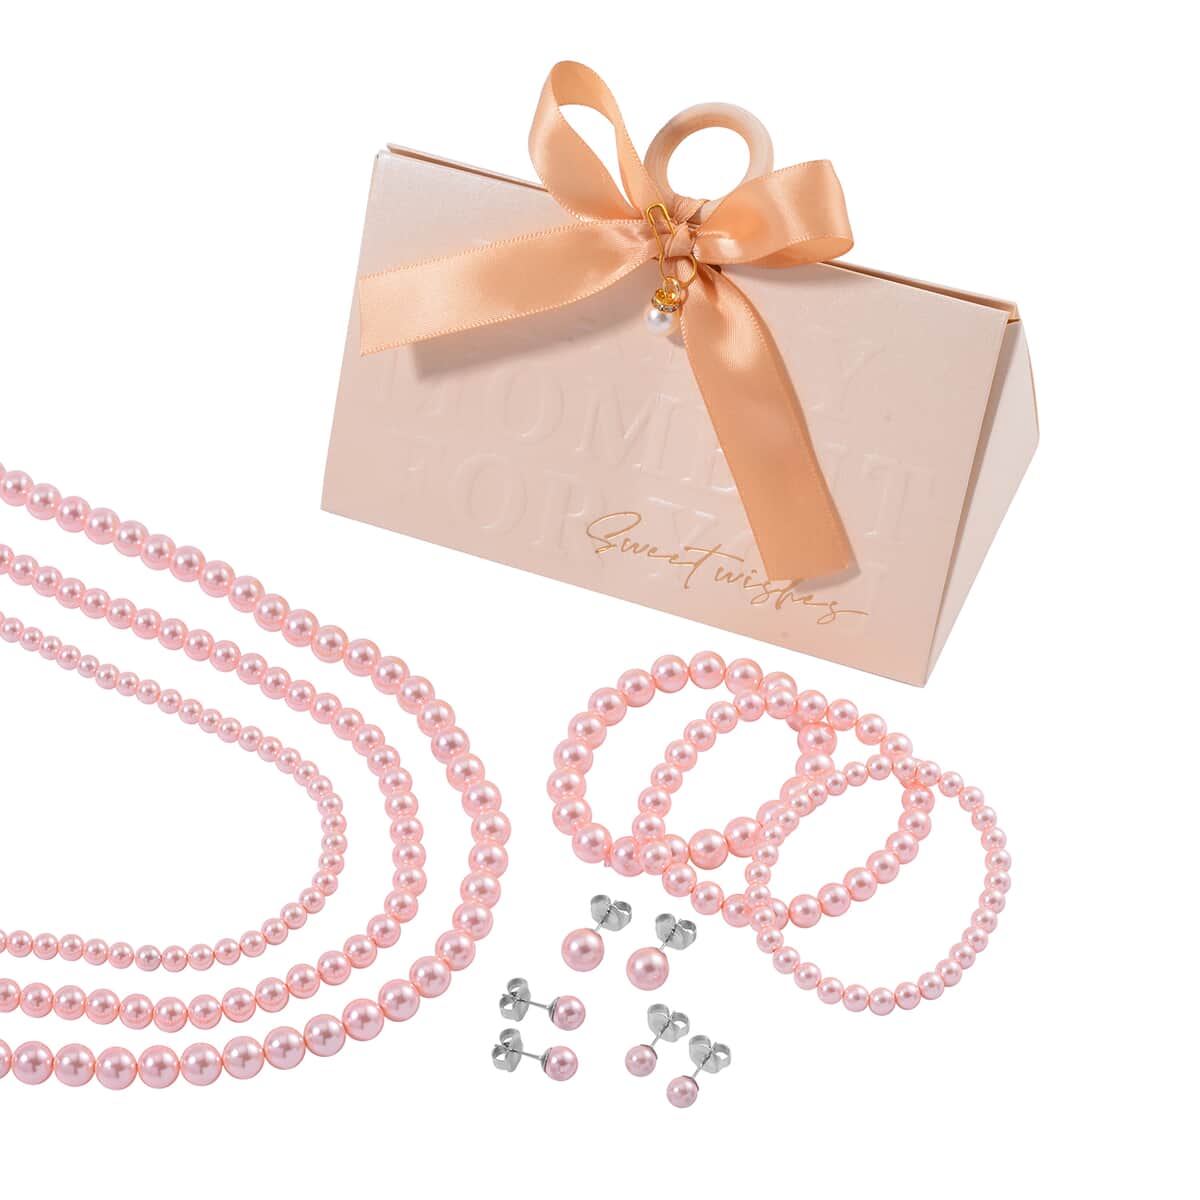 Set with Bow Ribbon Ivory Packaging 9pcs Set Peach Color Constituted Shell Pearl Stretch Bracelet, Earrings and Necklace 20-22 Inches in Stainless Steel image number 0